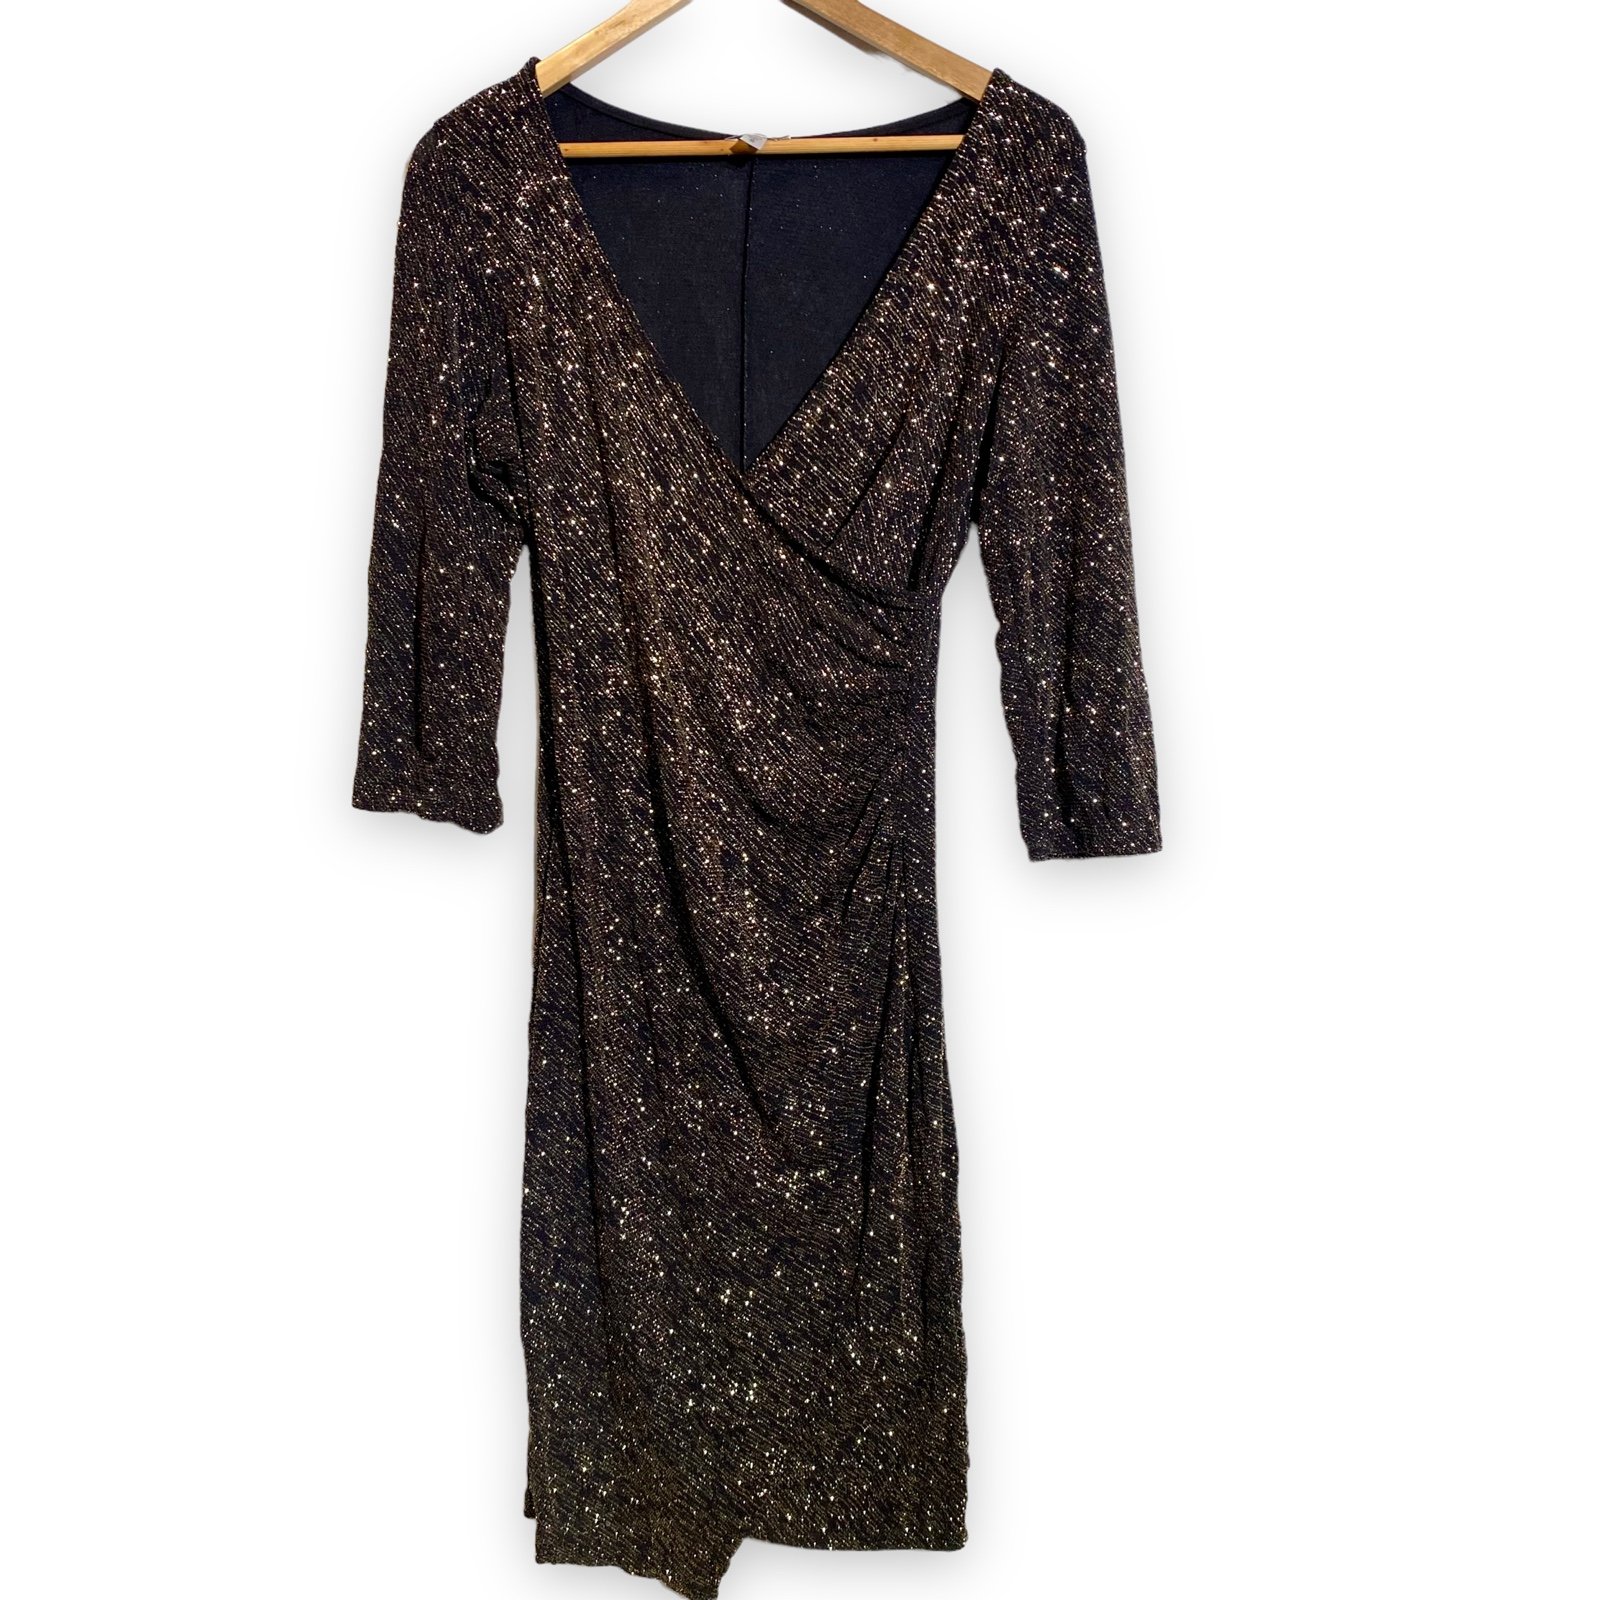 Women´s Olivia Matthews Black & Gold Sparkly Fitted V-Neck Cocktail Dress - S Rvp7phq26